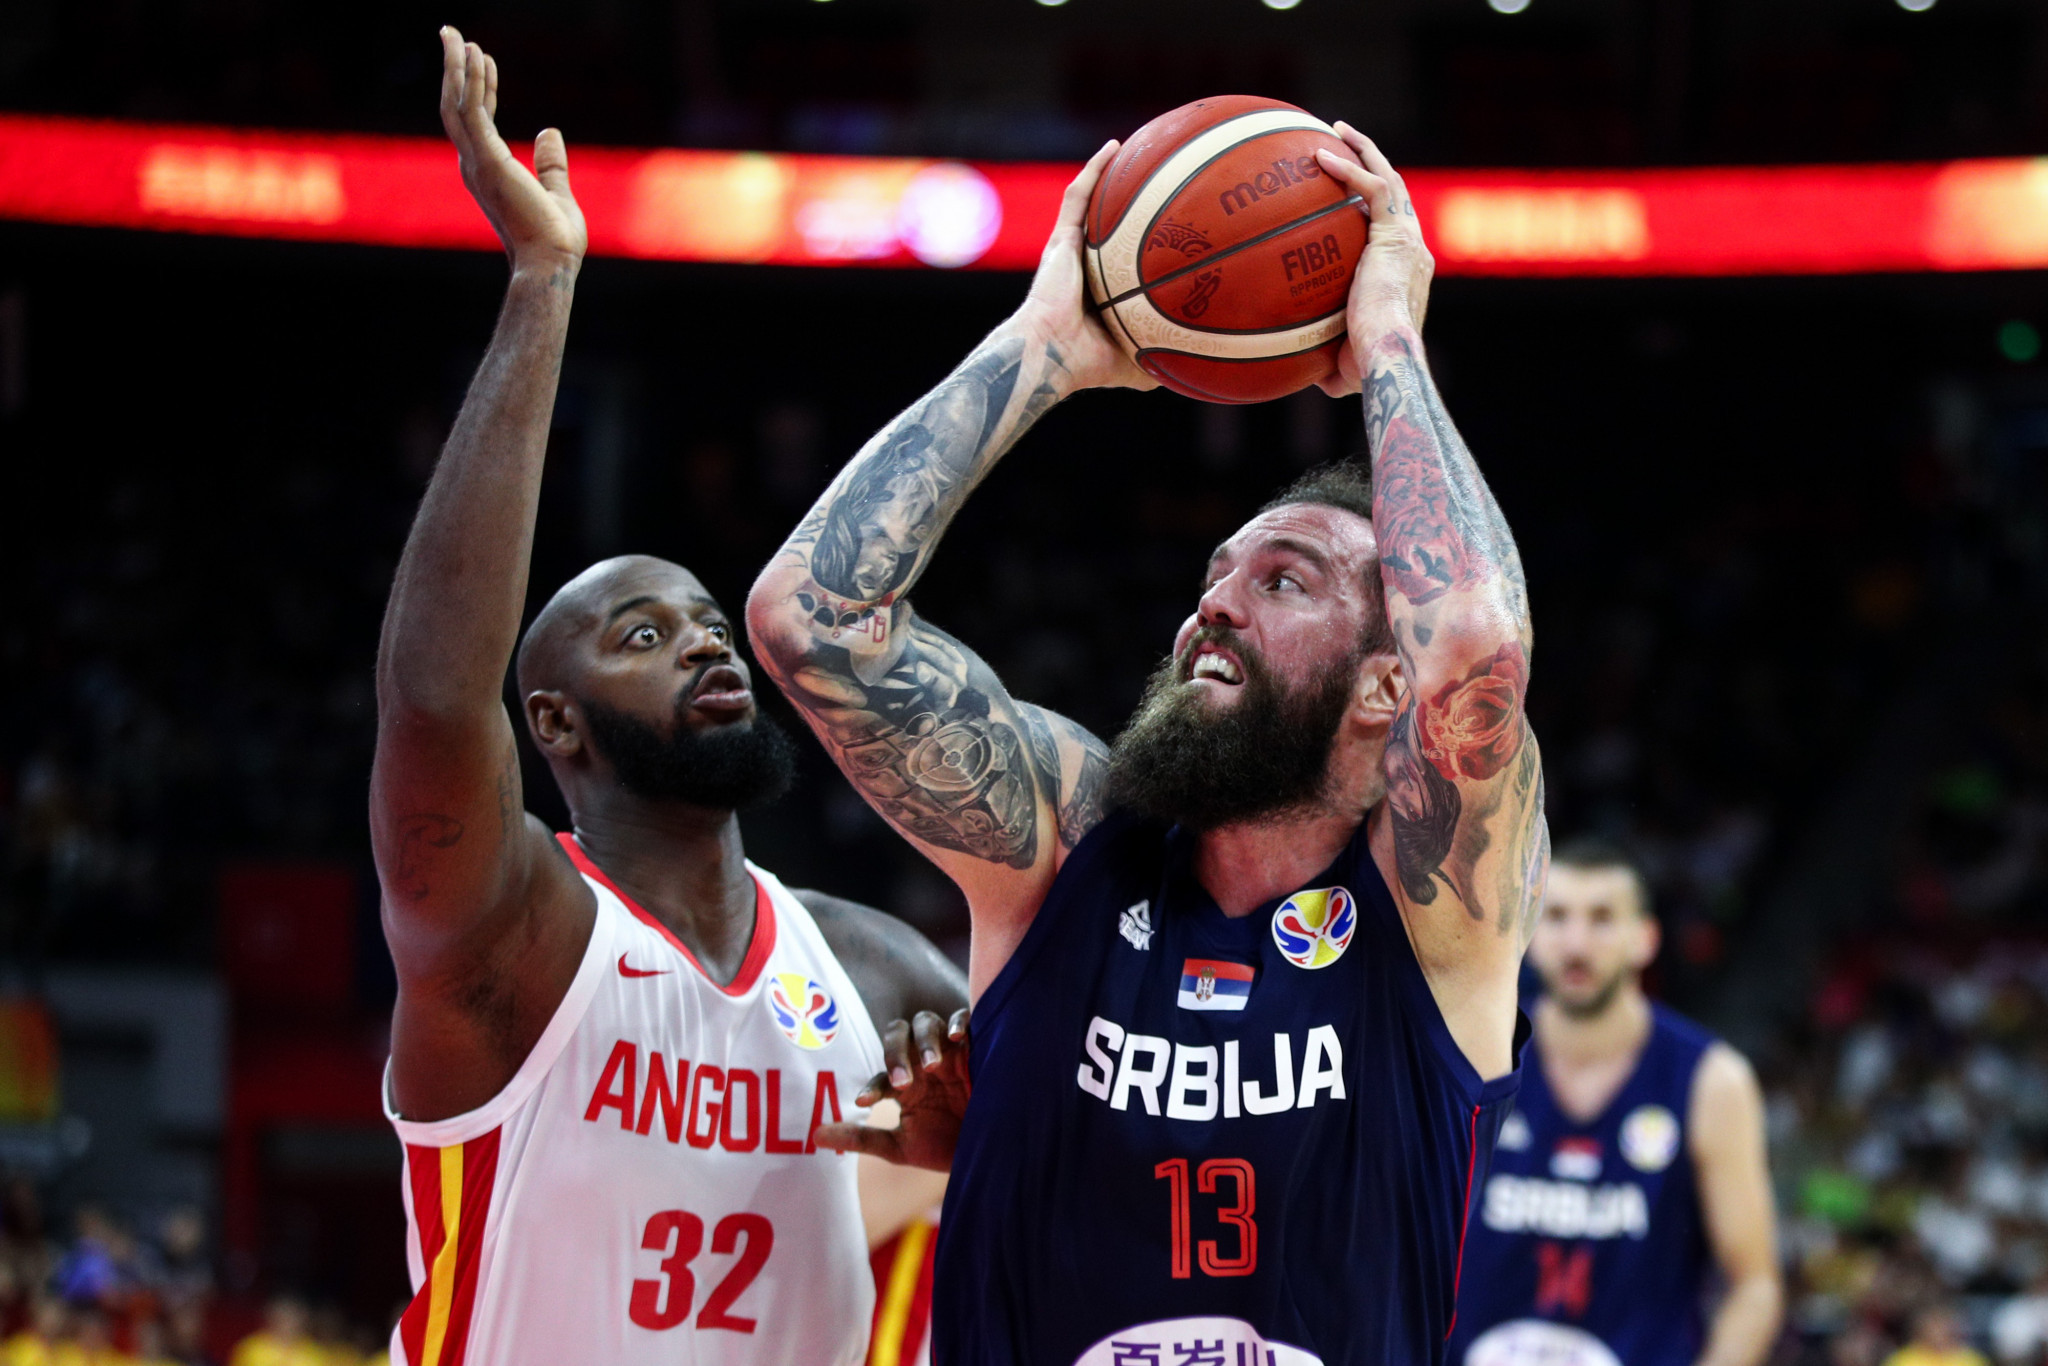 Serbia open FIBA World Cup account with resounding win over Angola